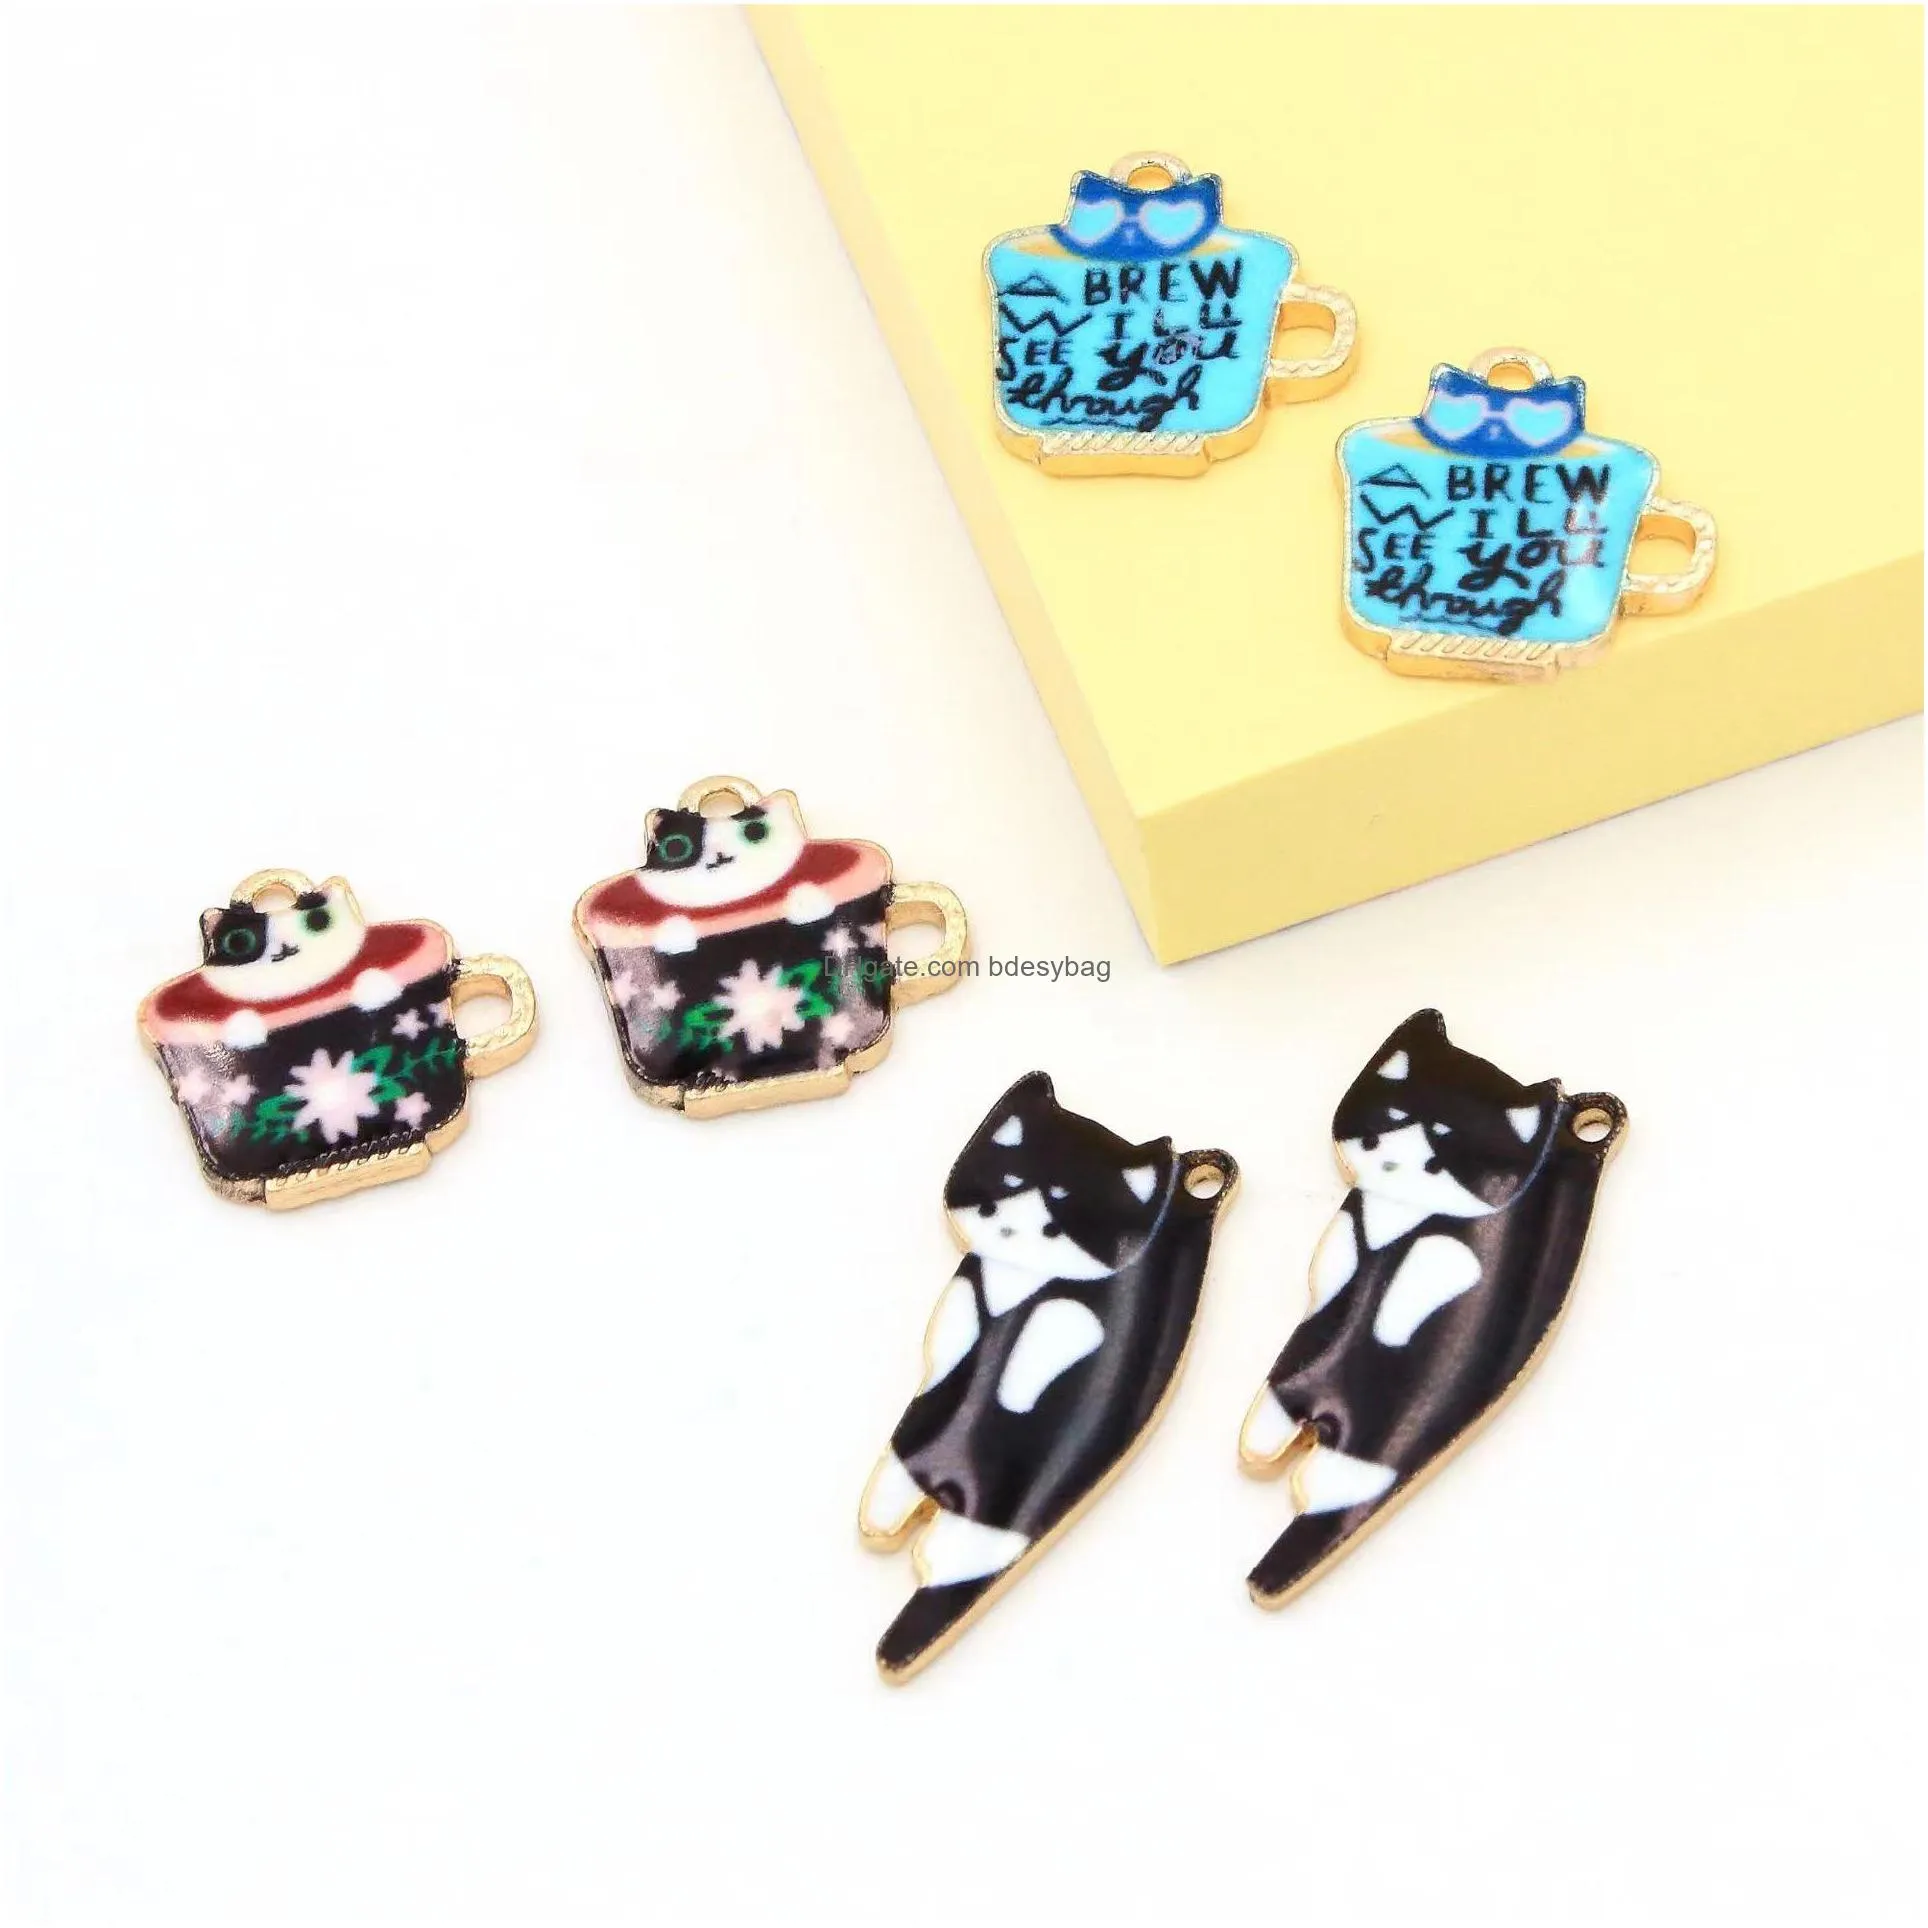 20pcs/lot cartoon animal cat enamel charms for jewelry making cute drop earrings pendants necklaces diy keychain crafts supplies